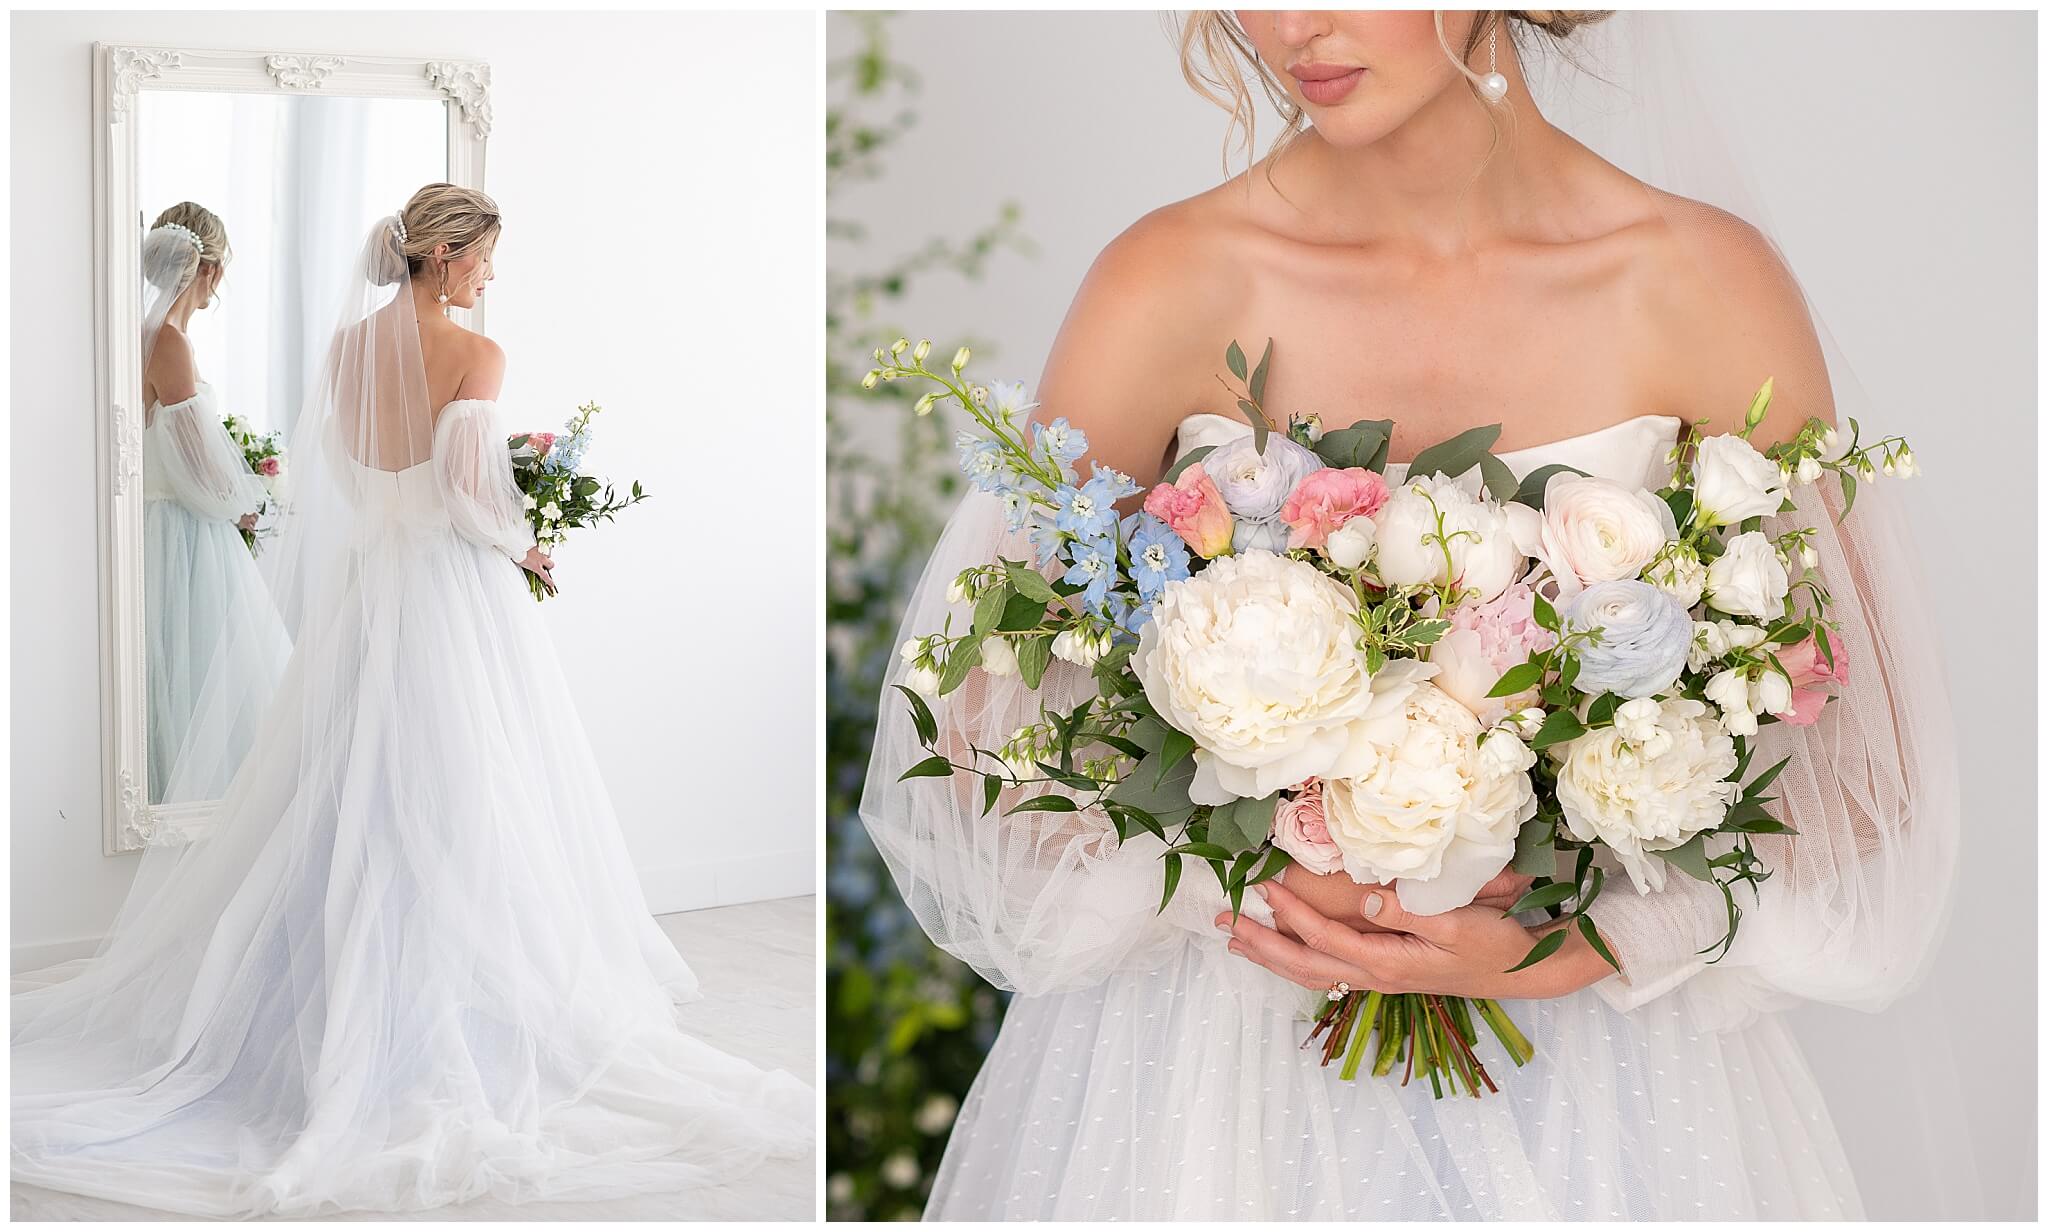 a collage showing the rear of a bride's gown and the face of her bridal bouquet with blue, white and pink flowers. Captured by Ottawa Wedding Photographer JEMMAN Photography